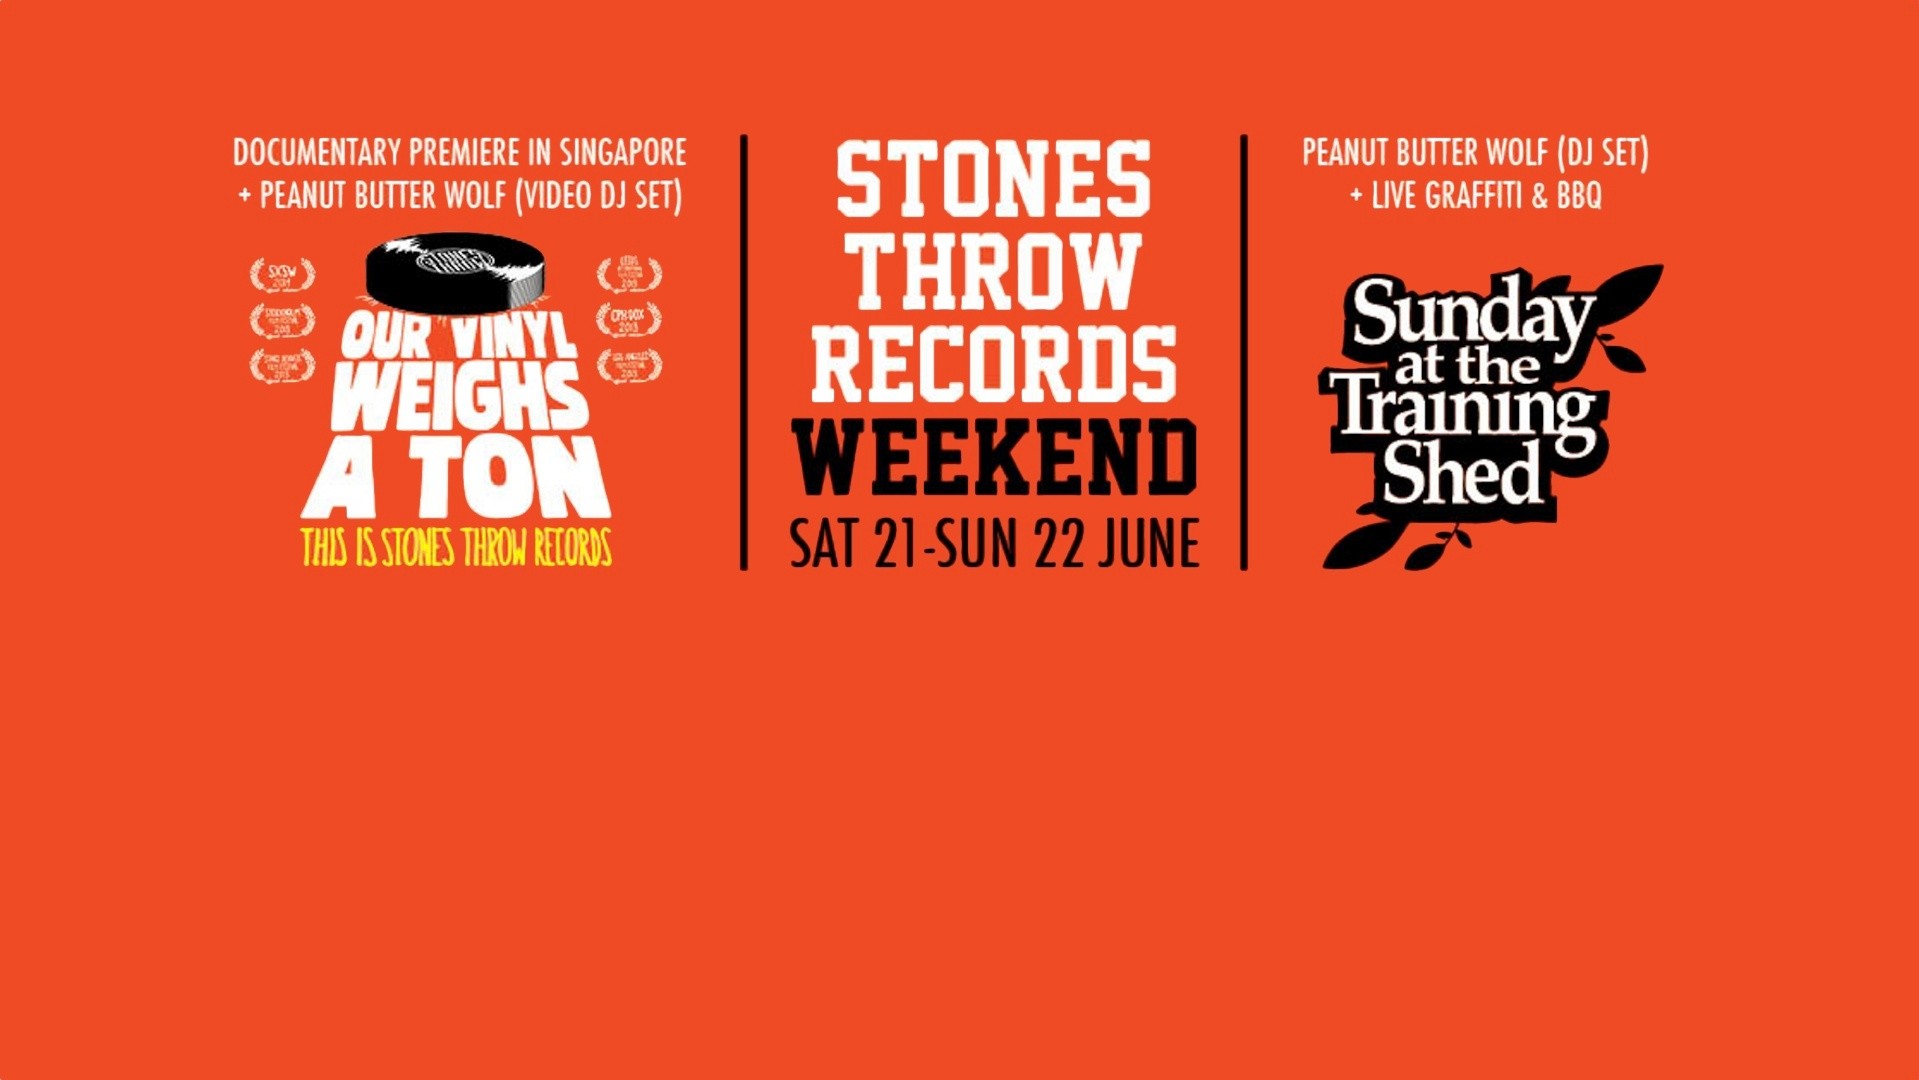 Stones Throw Records Weekend Pt 2